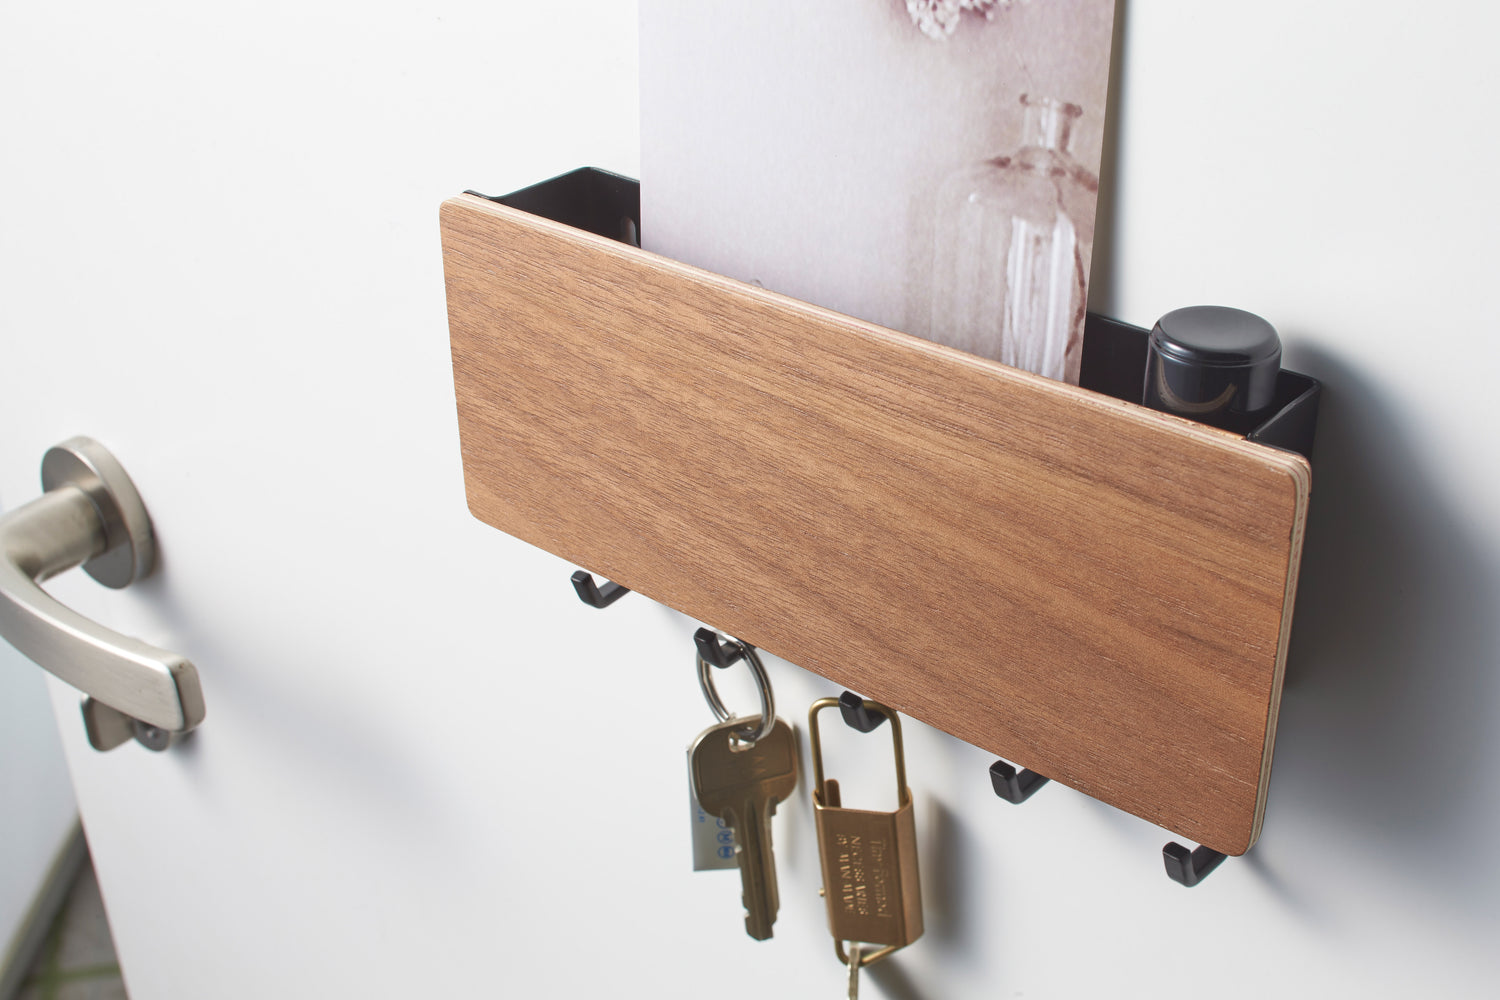 View 8 - Close up view of walnut Magnetic Key Rack with Tray holding keys by Yamazaki Home.